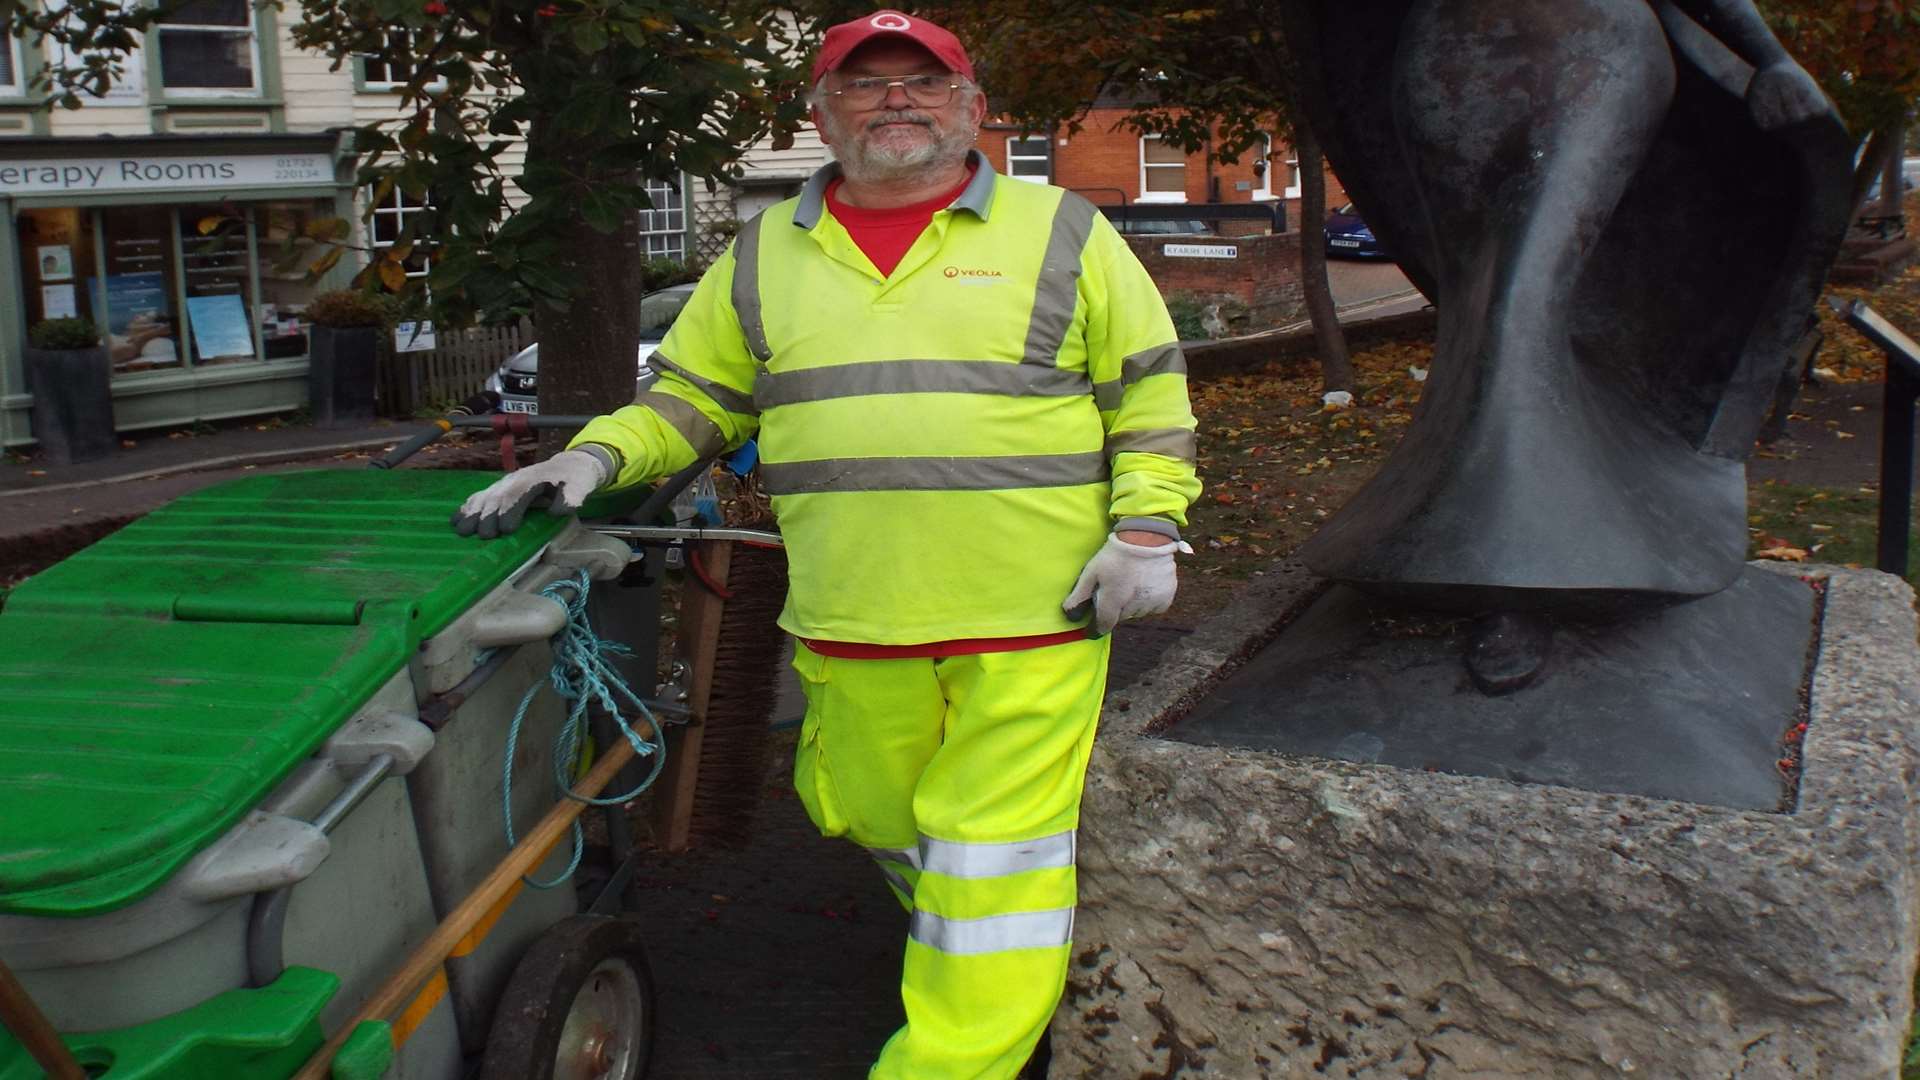 Unsung hero Clive Mitson keeps West Malling's streets clean come rain or shine